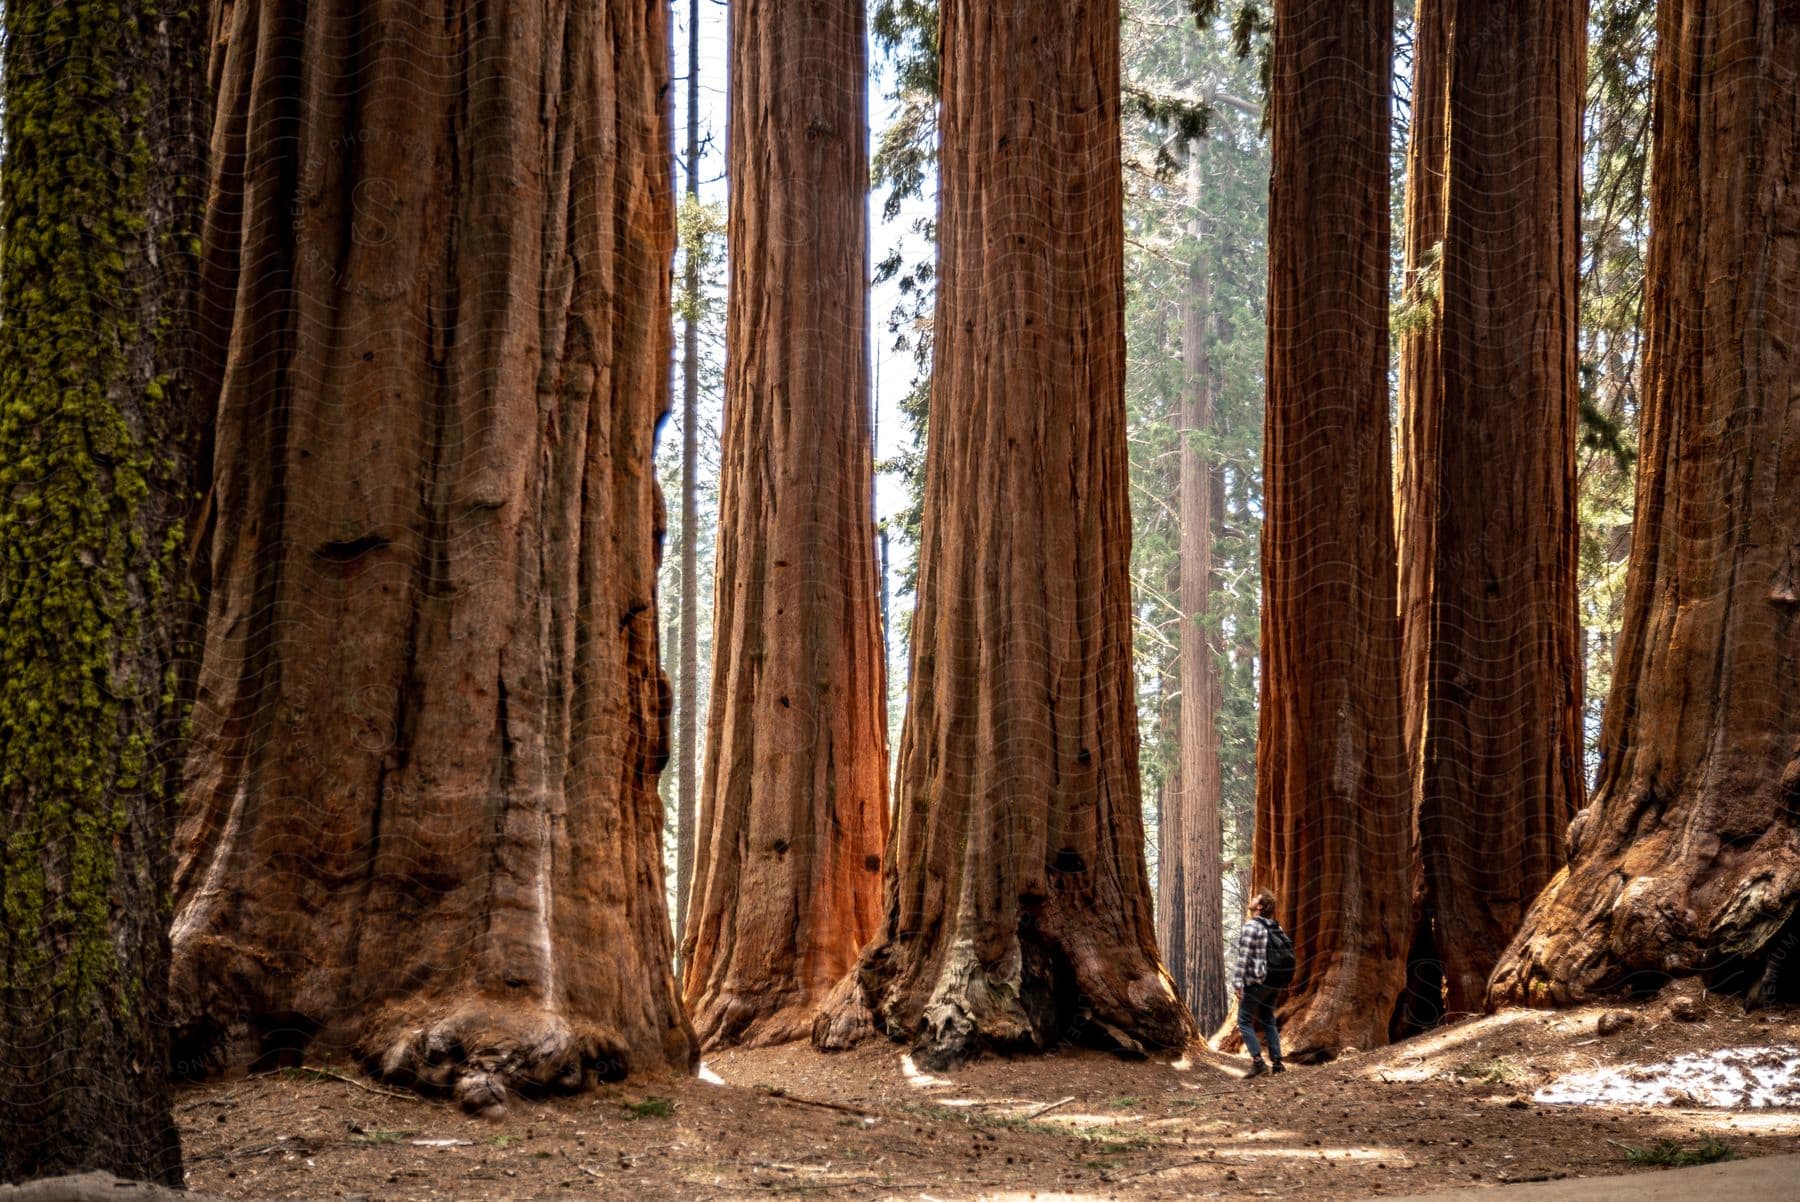 Man standing among giant sequoia trees in a forest.